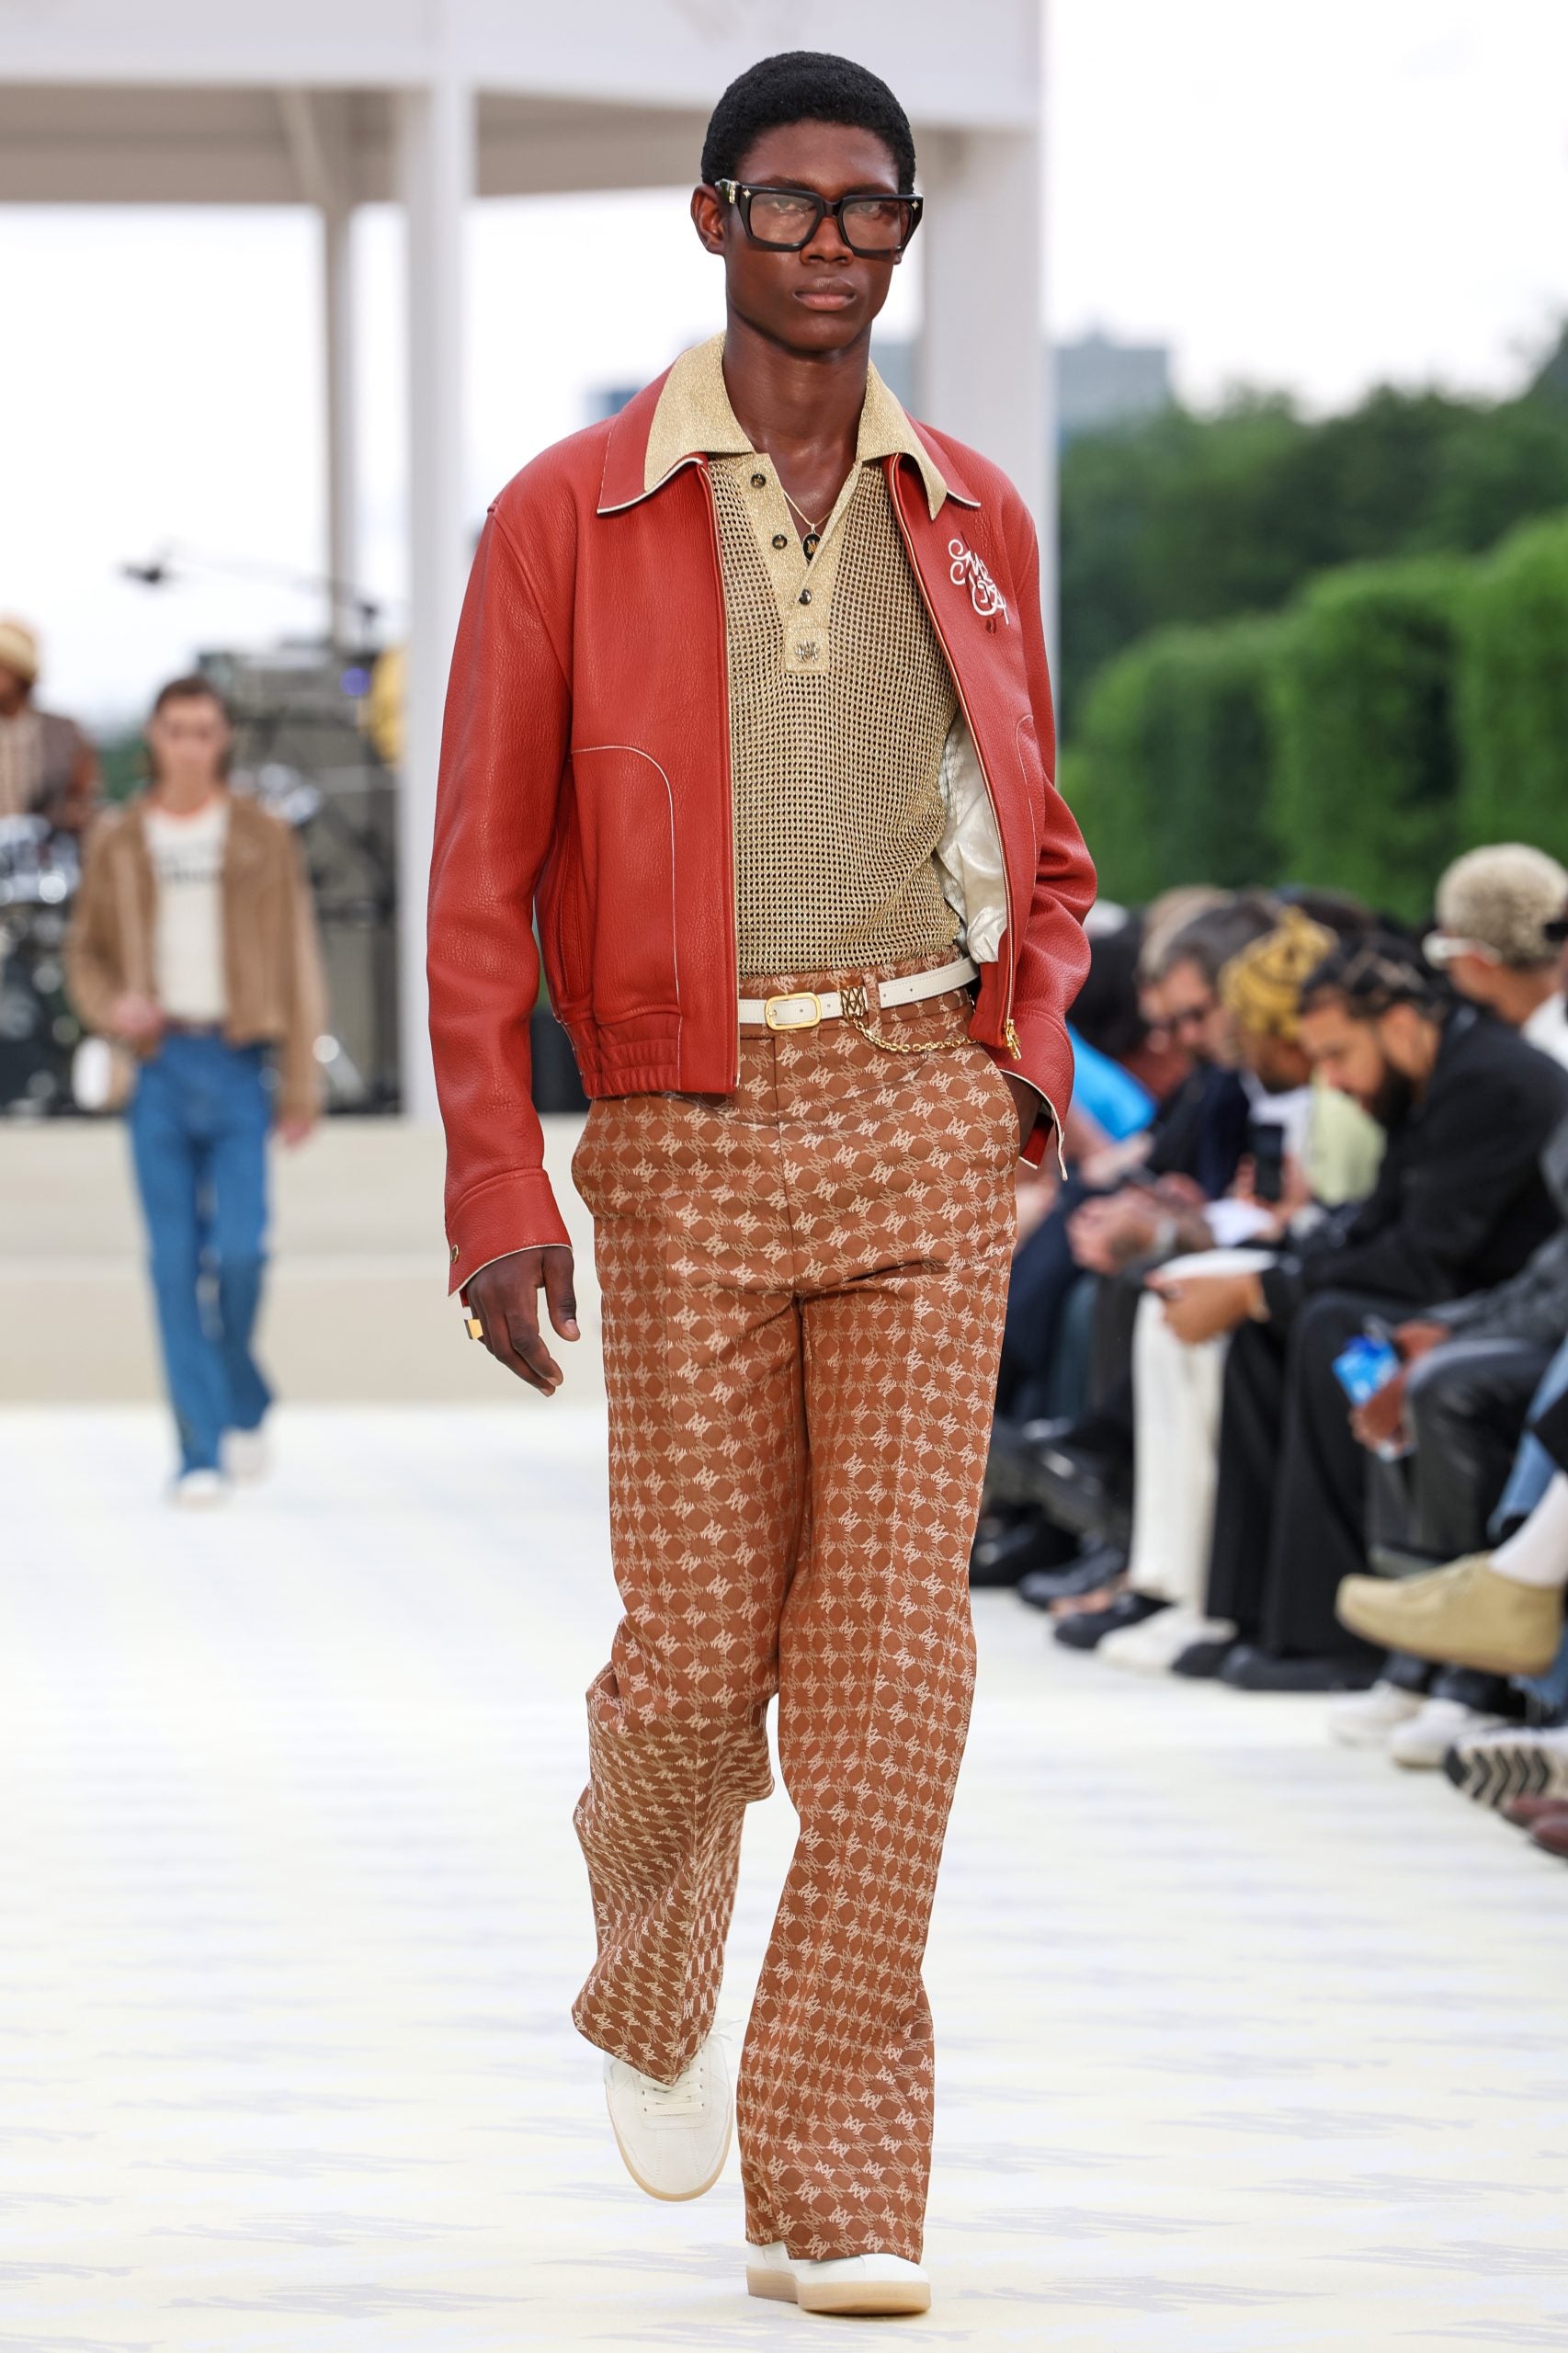 Paris Fashion Week Men’s Trends Spotted On The Runway